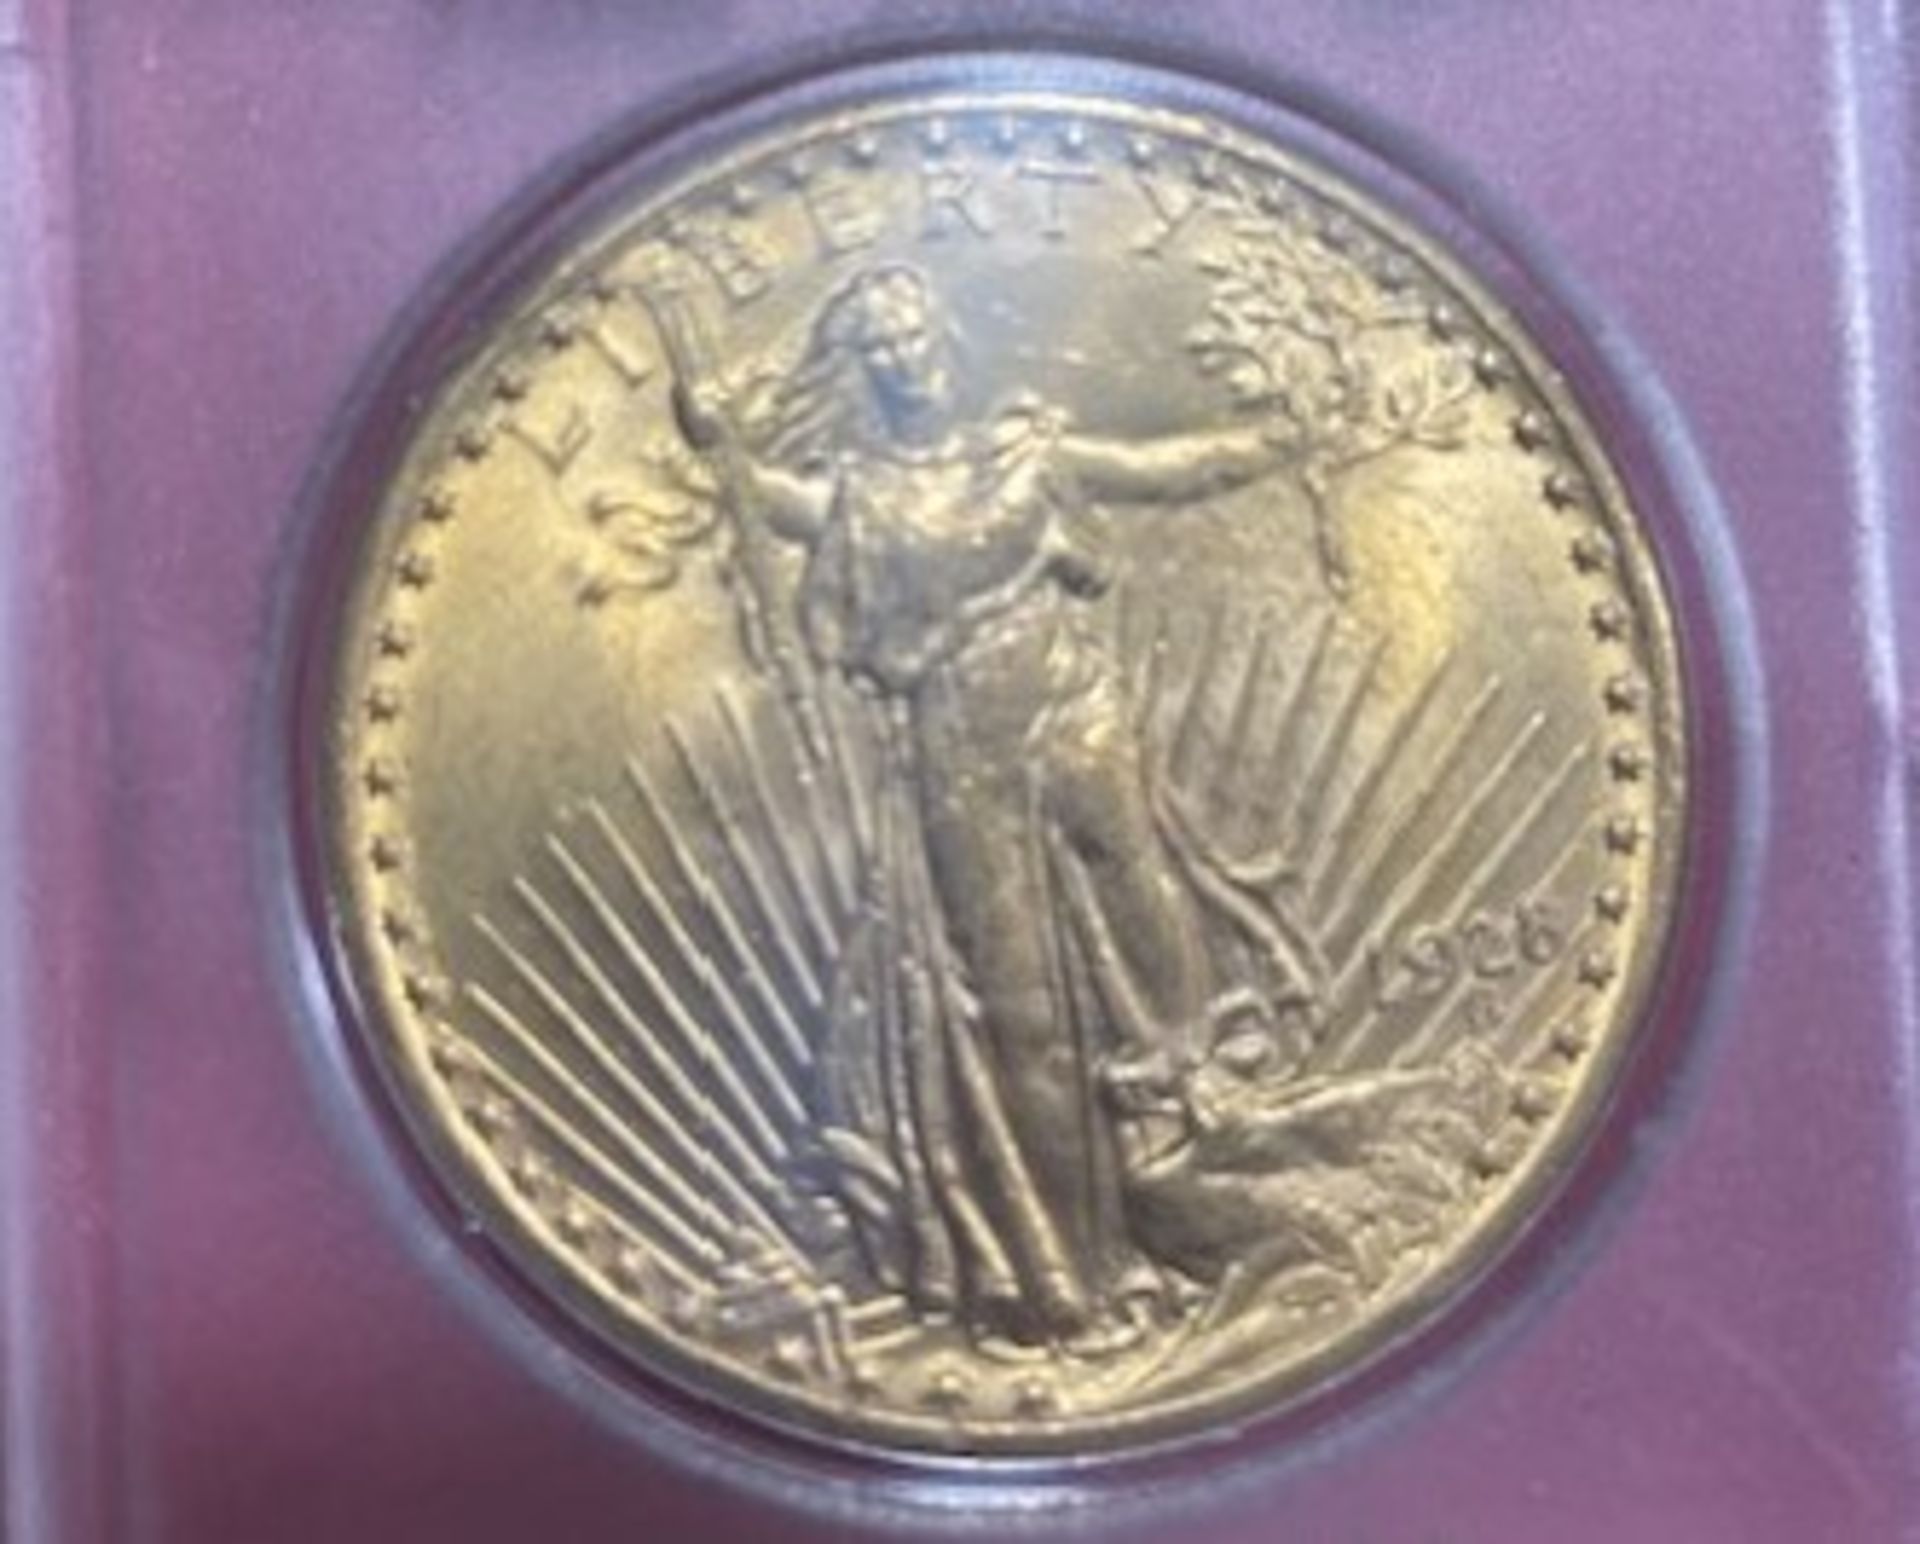 1928 St. Gaudens Double Eagle $20 Gold Coin - Image 4 of 12